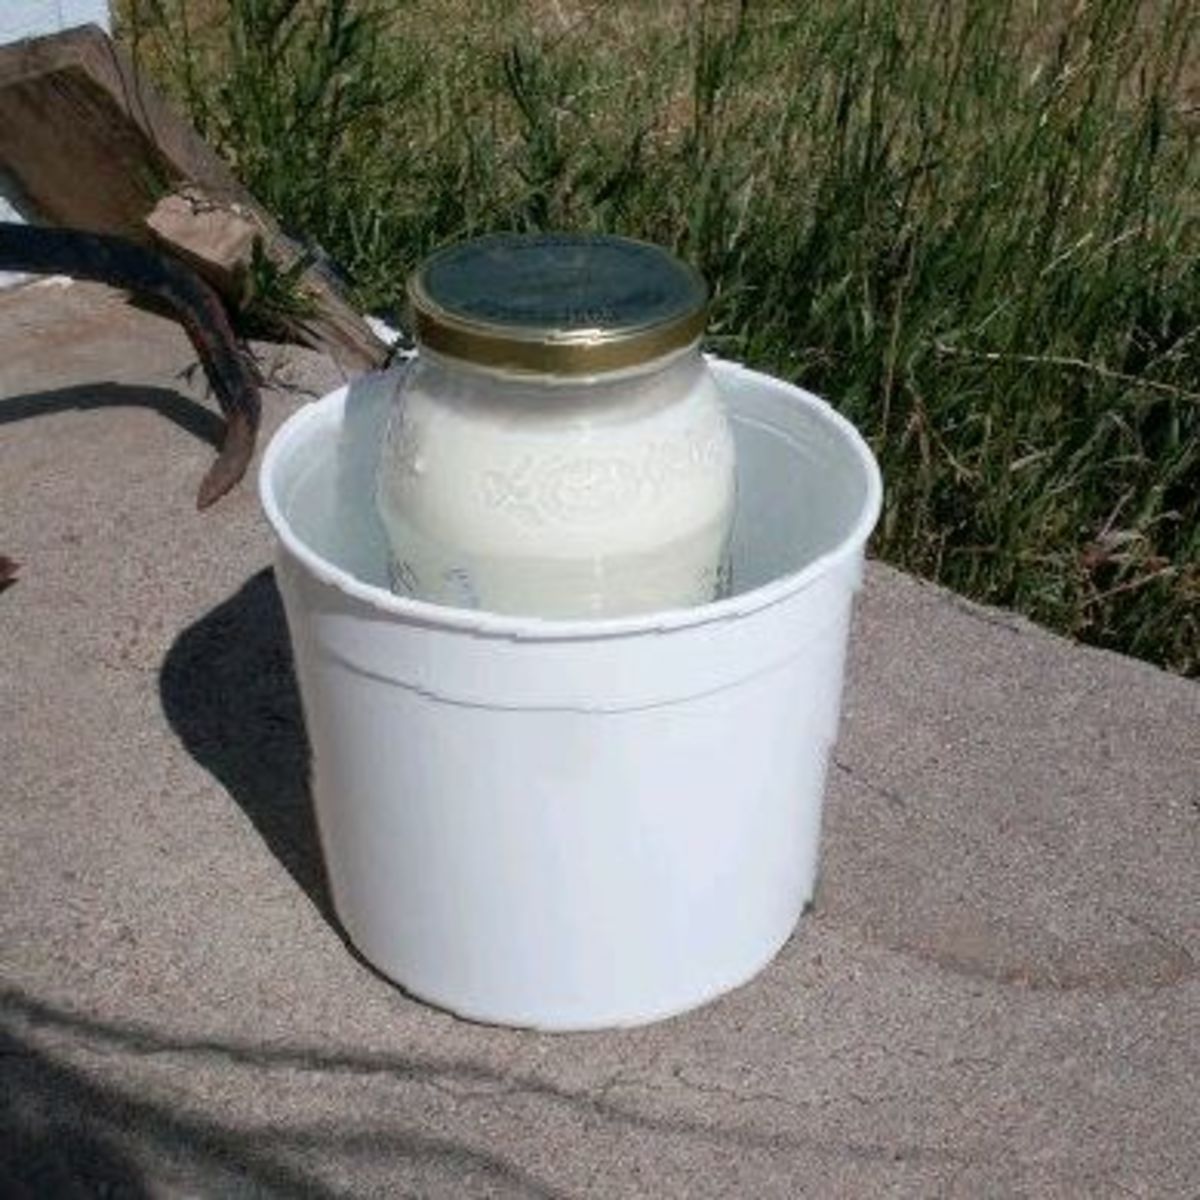 Because I use a big jar on which the lid does not fit very tightly, I cannot lay it down in a cooler. So I rely on hot water, hot cement, and full summer sun. Keep the yogurt at 100* F. or more for it to culture correctly.